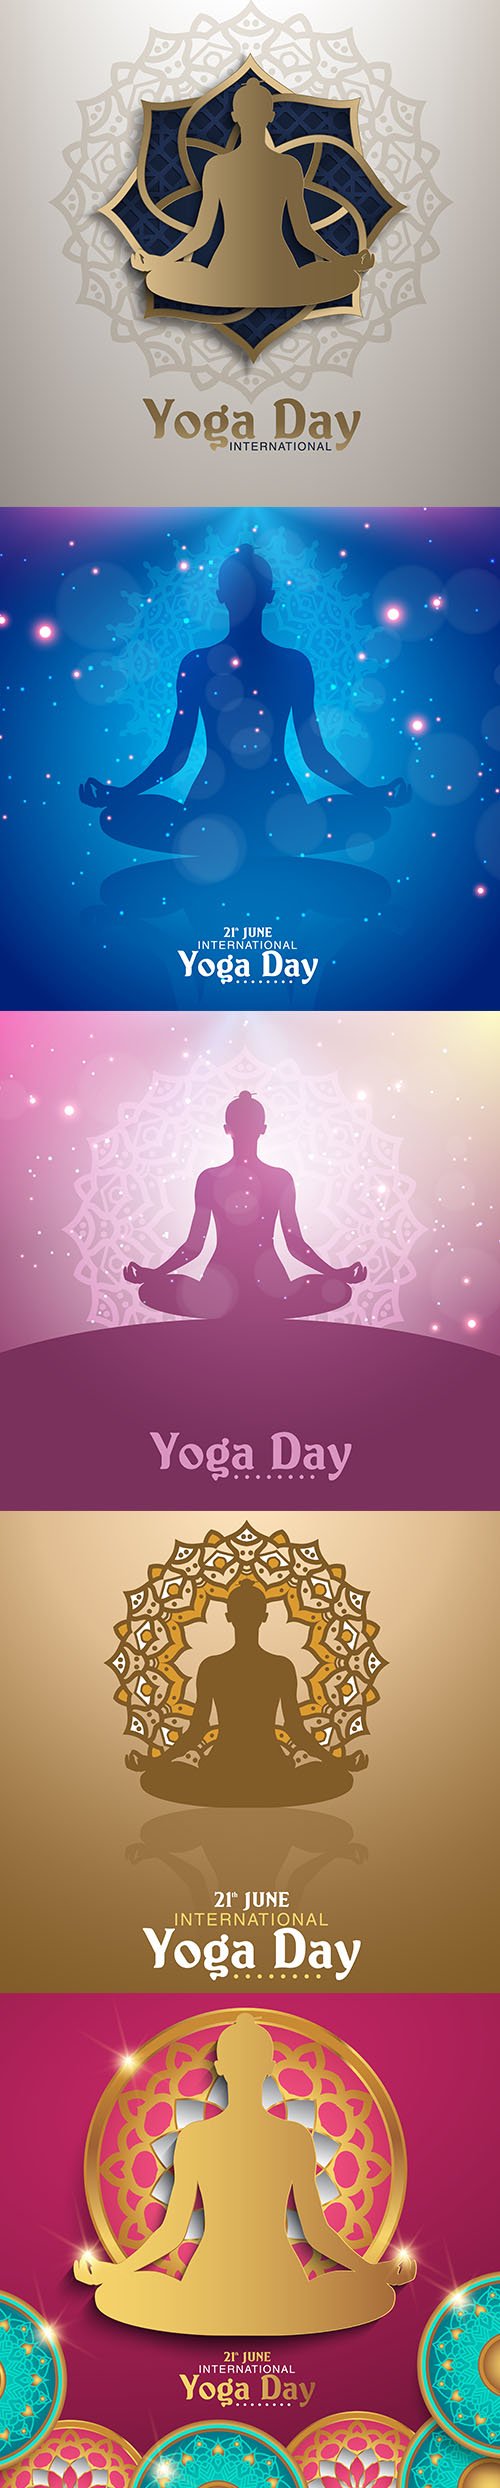 Abstract Yoga Day Background Vector Illustrations Set